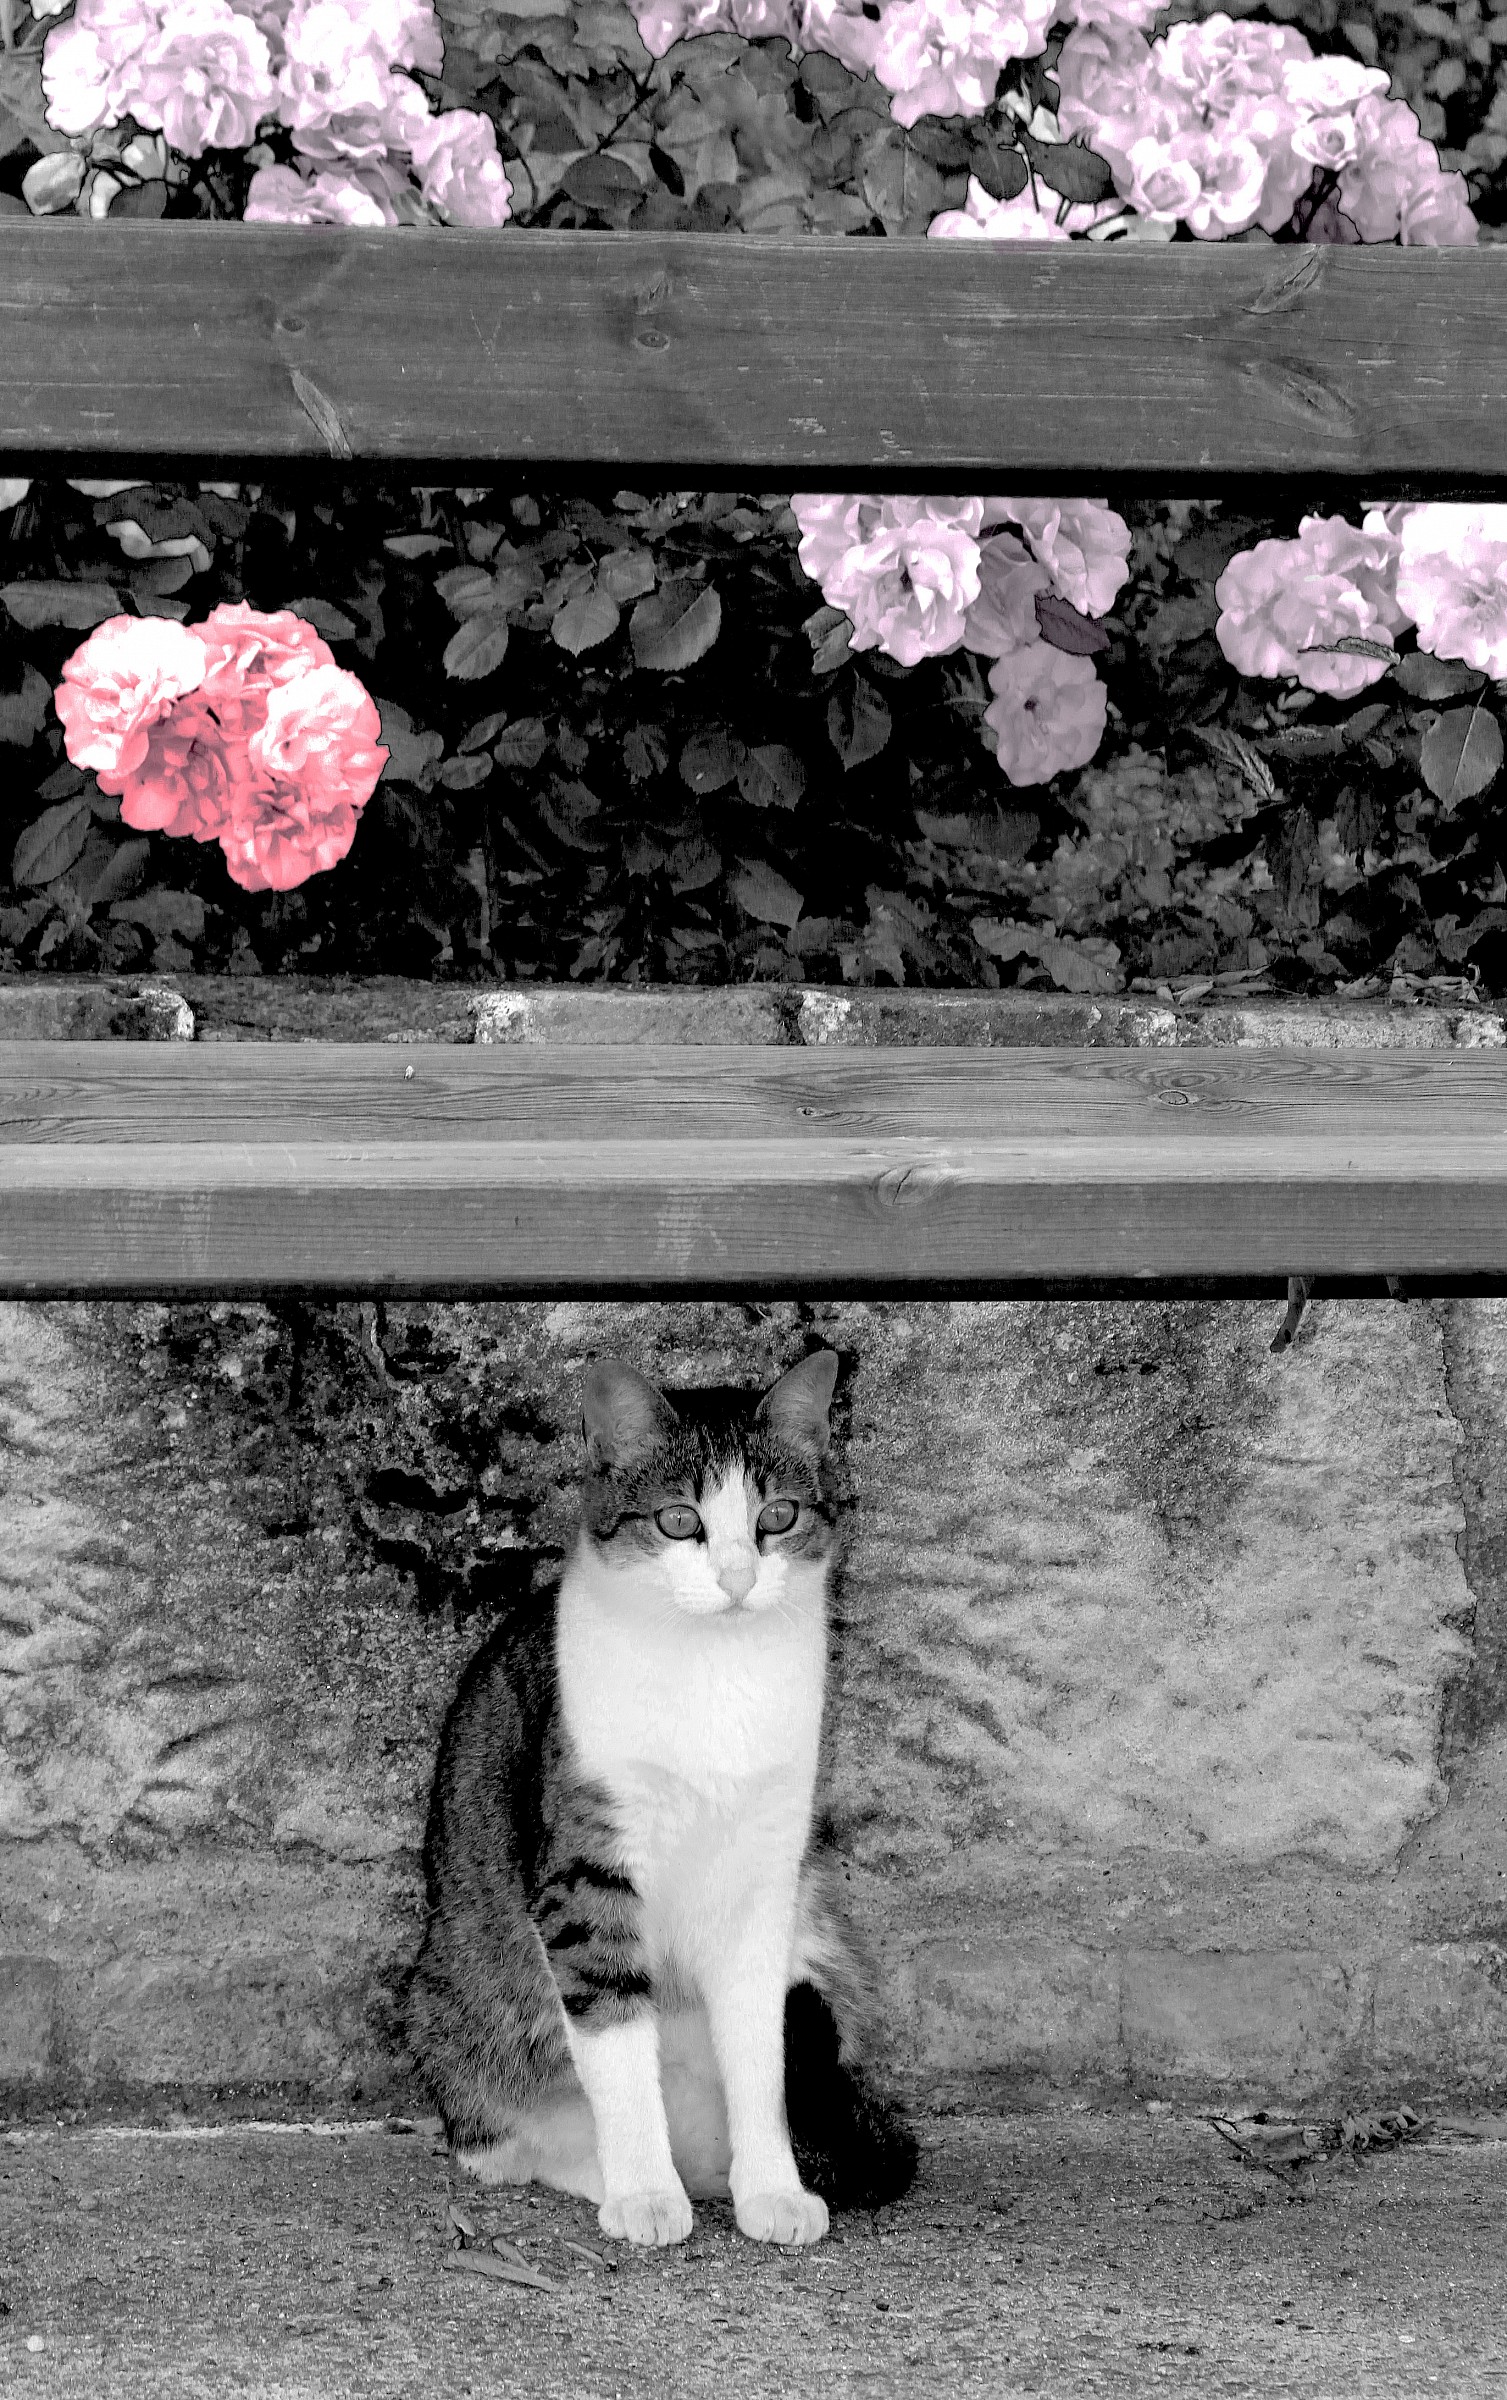 under the bench the cat .......